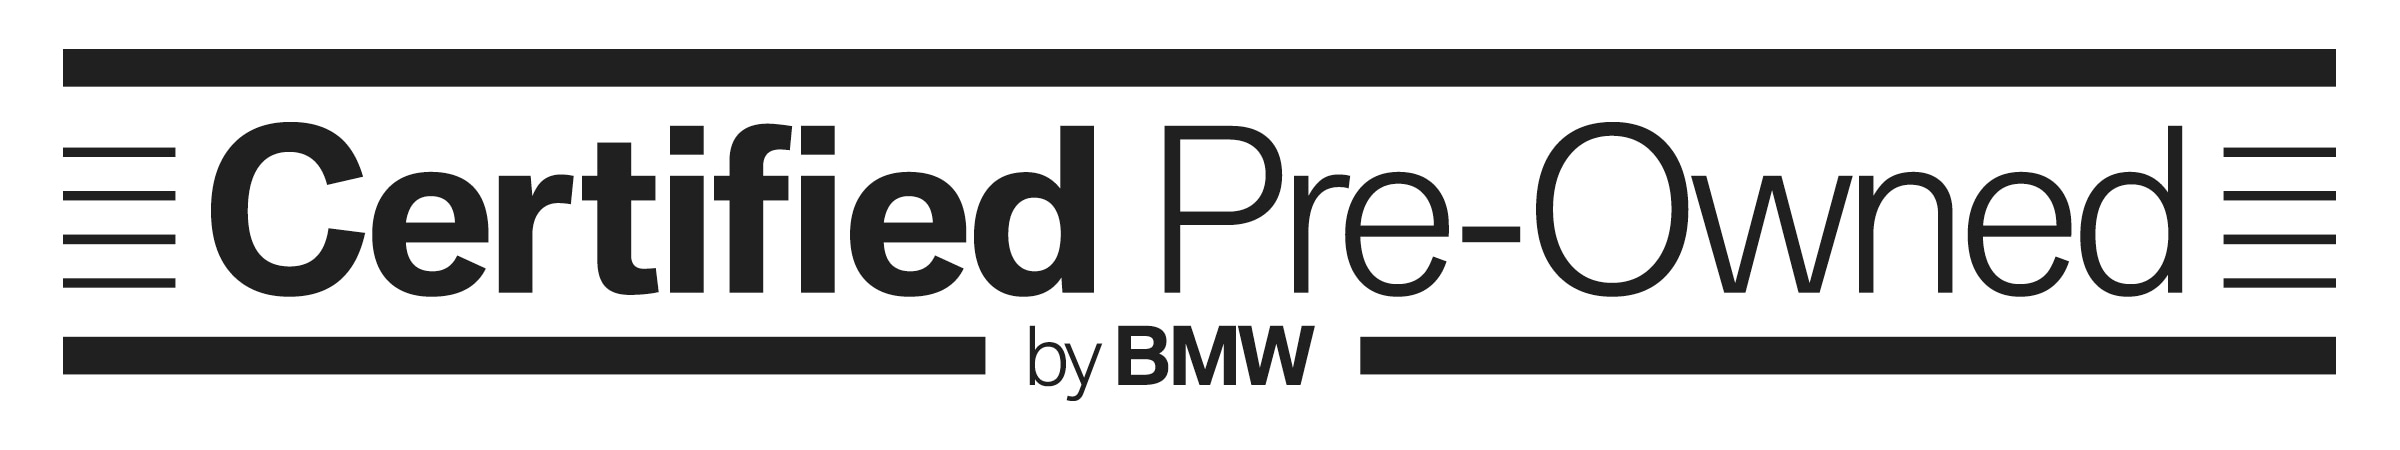 Bmw pre owned certification #1